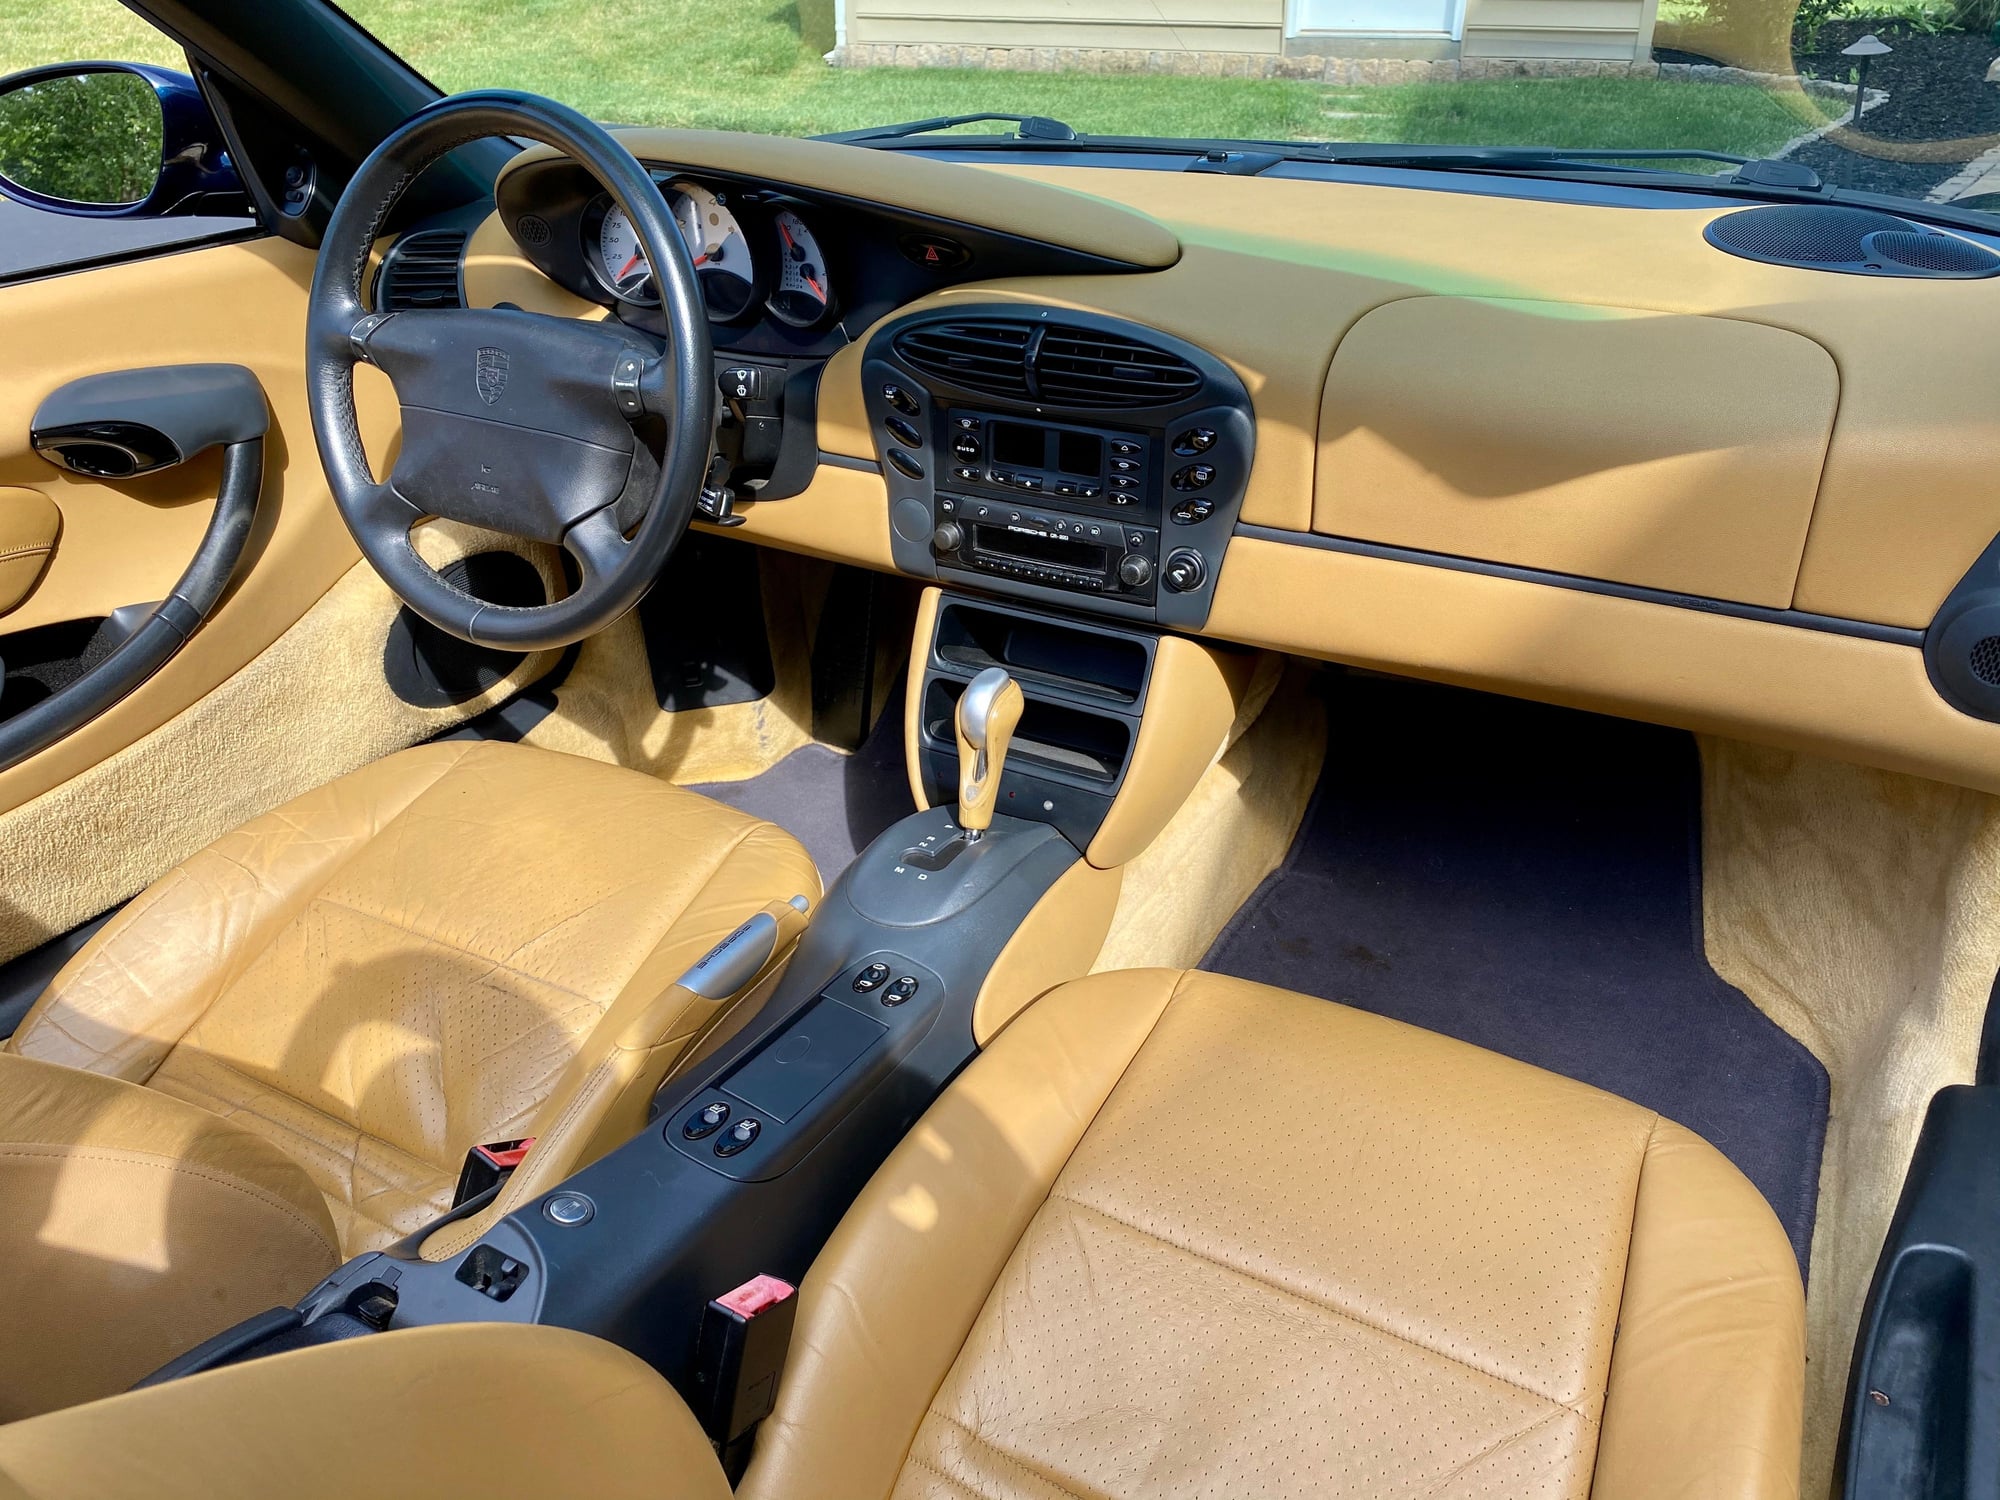 1999 Porsche Boxster - 1999 Boxster 2.5.  Ocean blue metallic/tan, Tiptronic, 76k miles. - Used - VIN WP0CA2981XU628960 - 76,000 Miles - 6 cyl - 2WD - Automatic - Convertible - Blue - Lansdale, PA 19446, United States